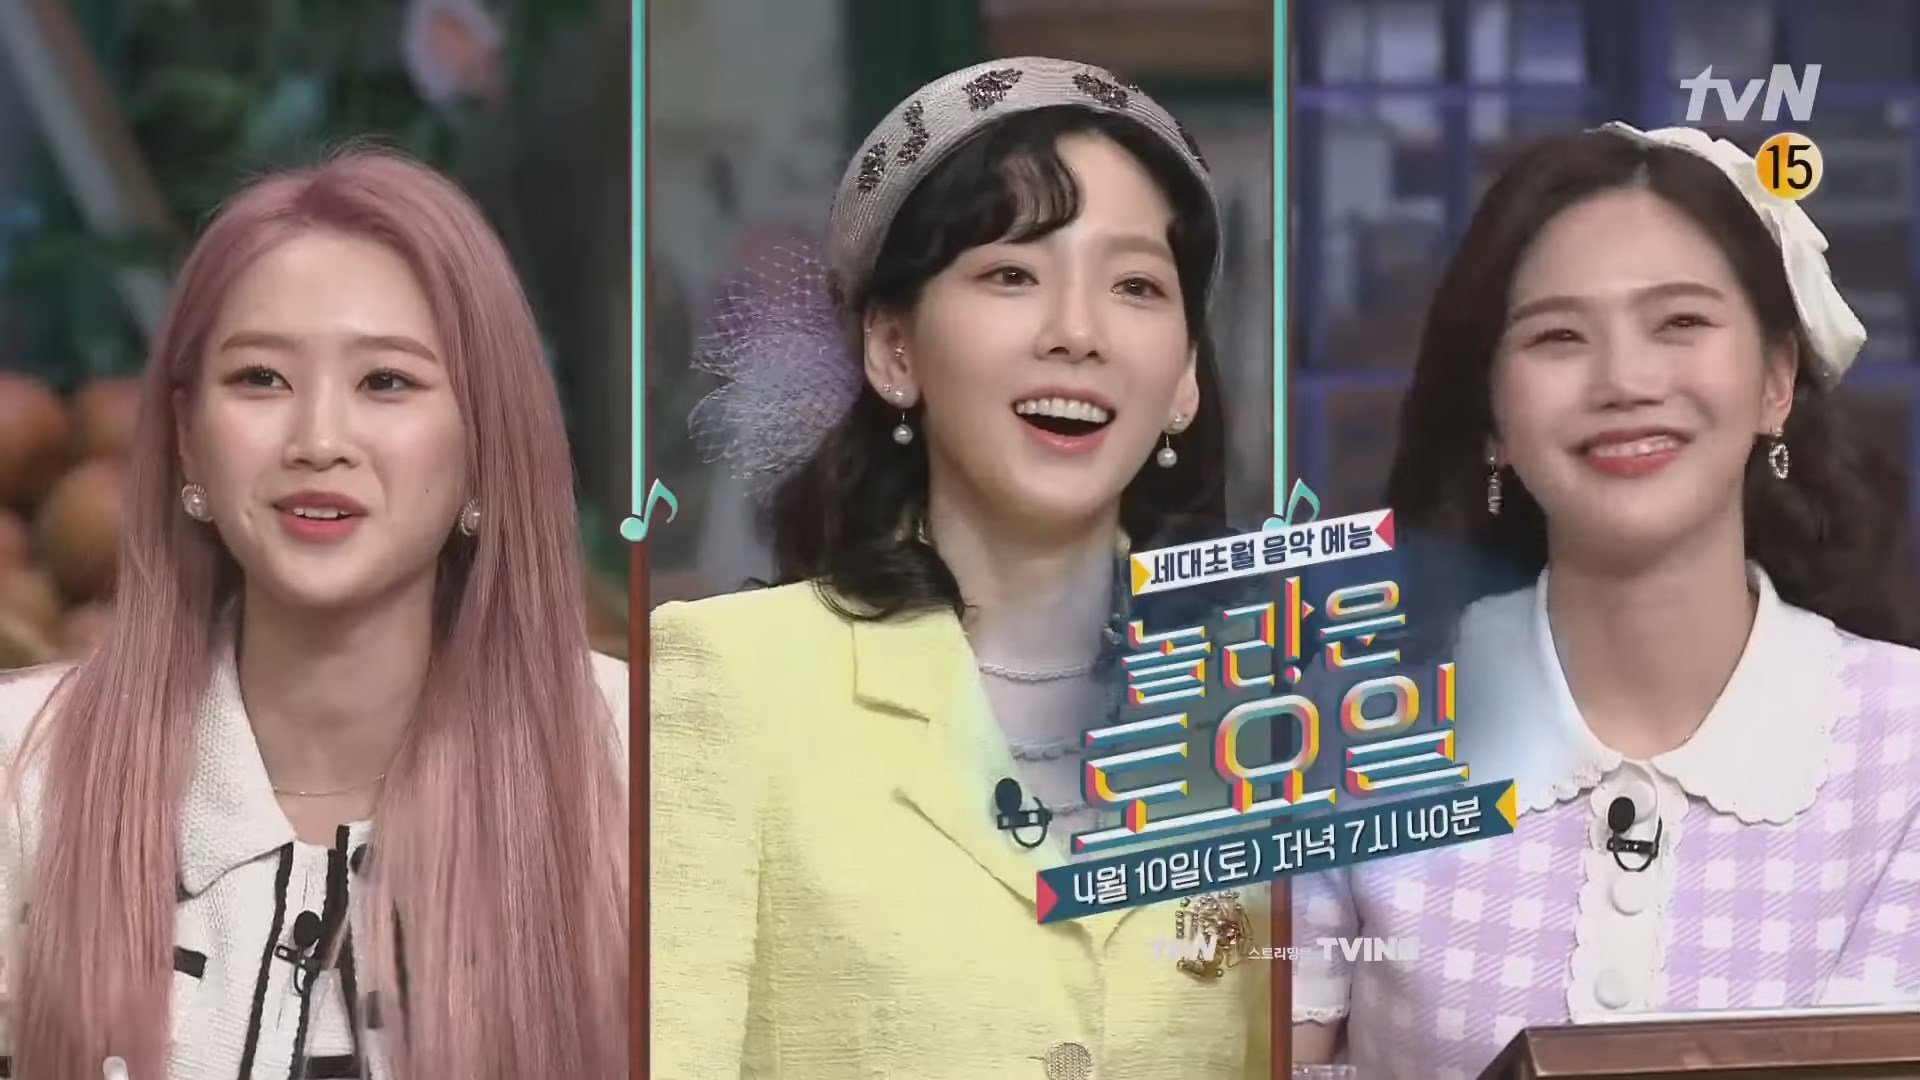 preview for Taeyeon's 'Amazing Saturday' with Oh My Girl - Wonderful Generation